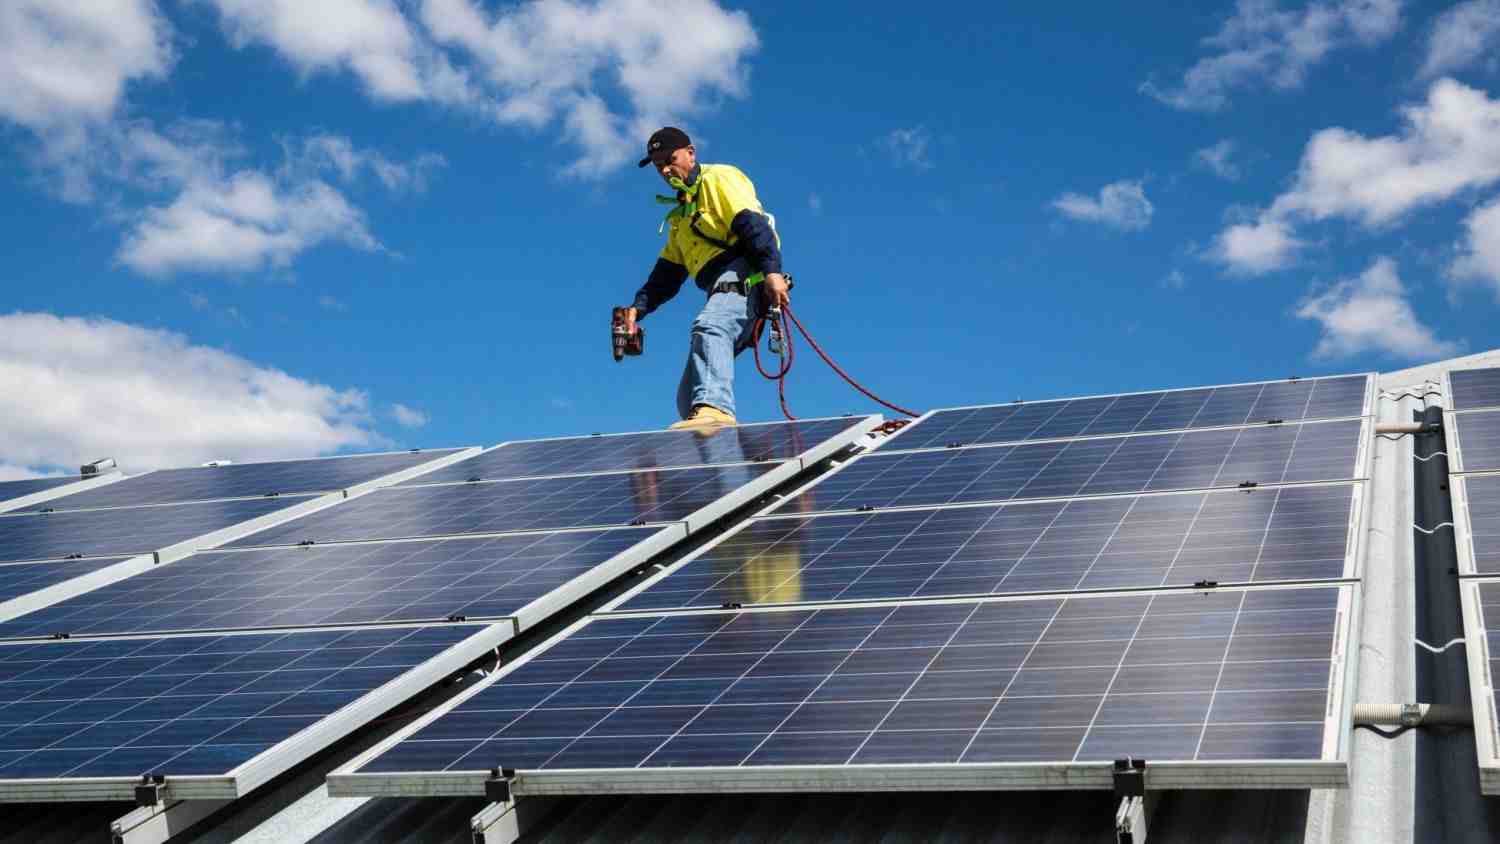 How long does it take solar panels to pay for themselves?